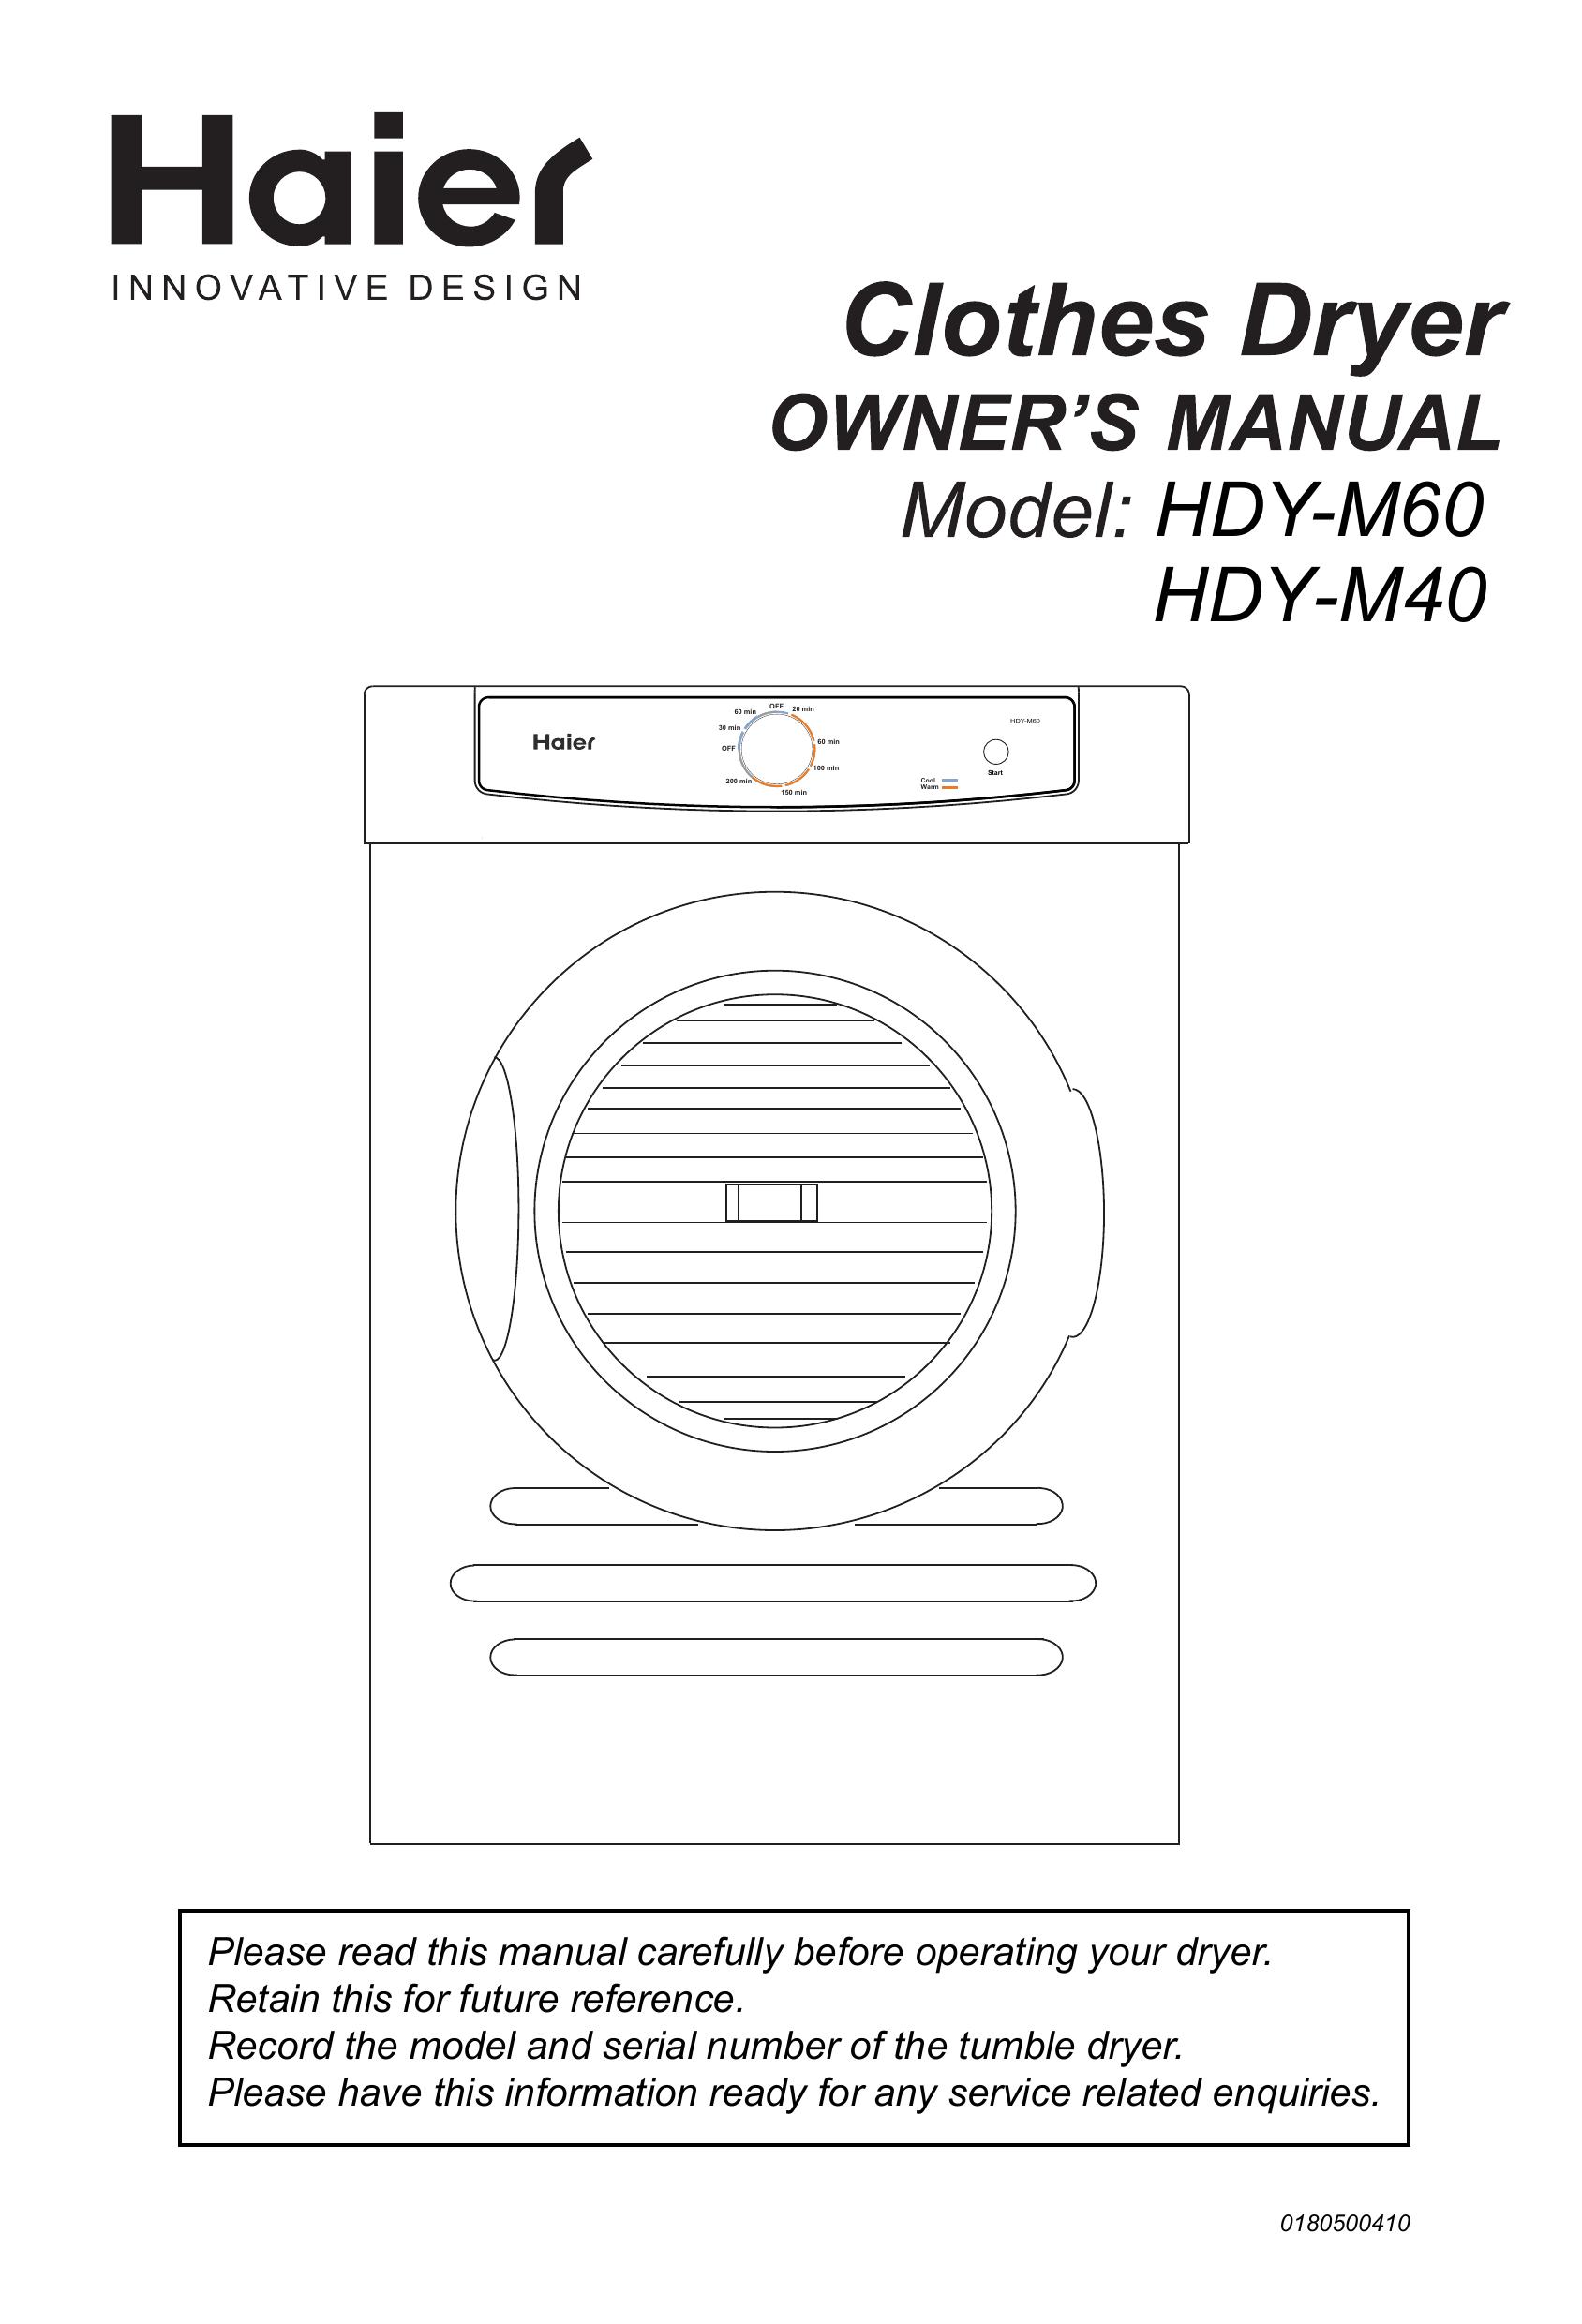 Haier HDY-M40 Dryer Accessories User Manual (Page 1)